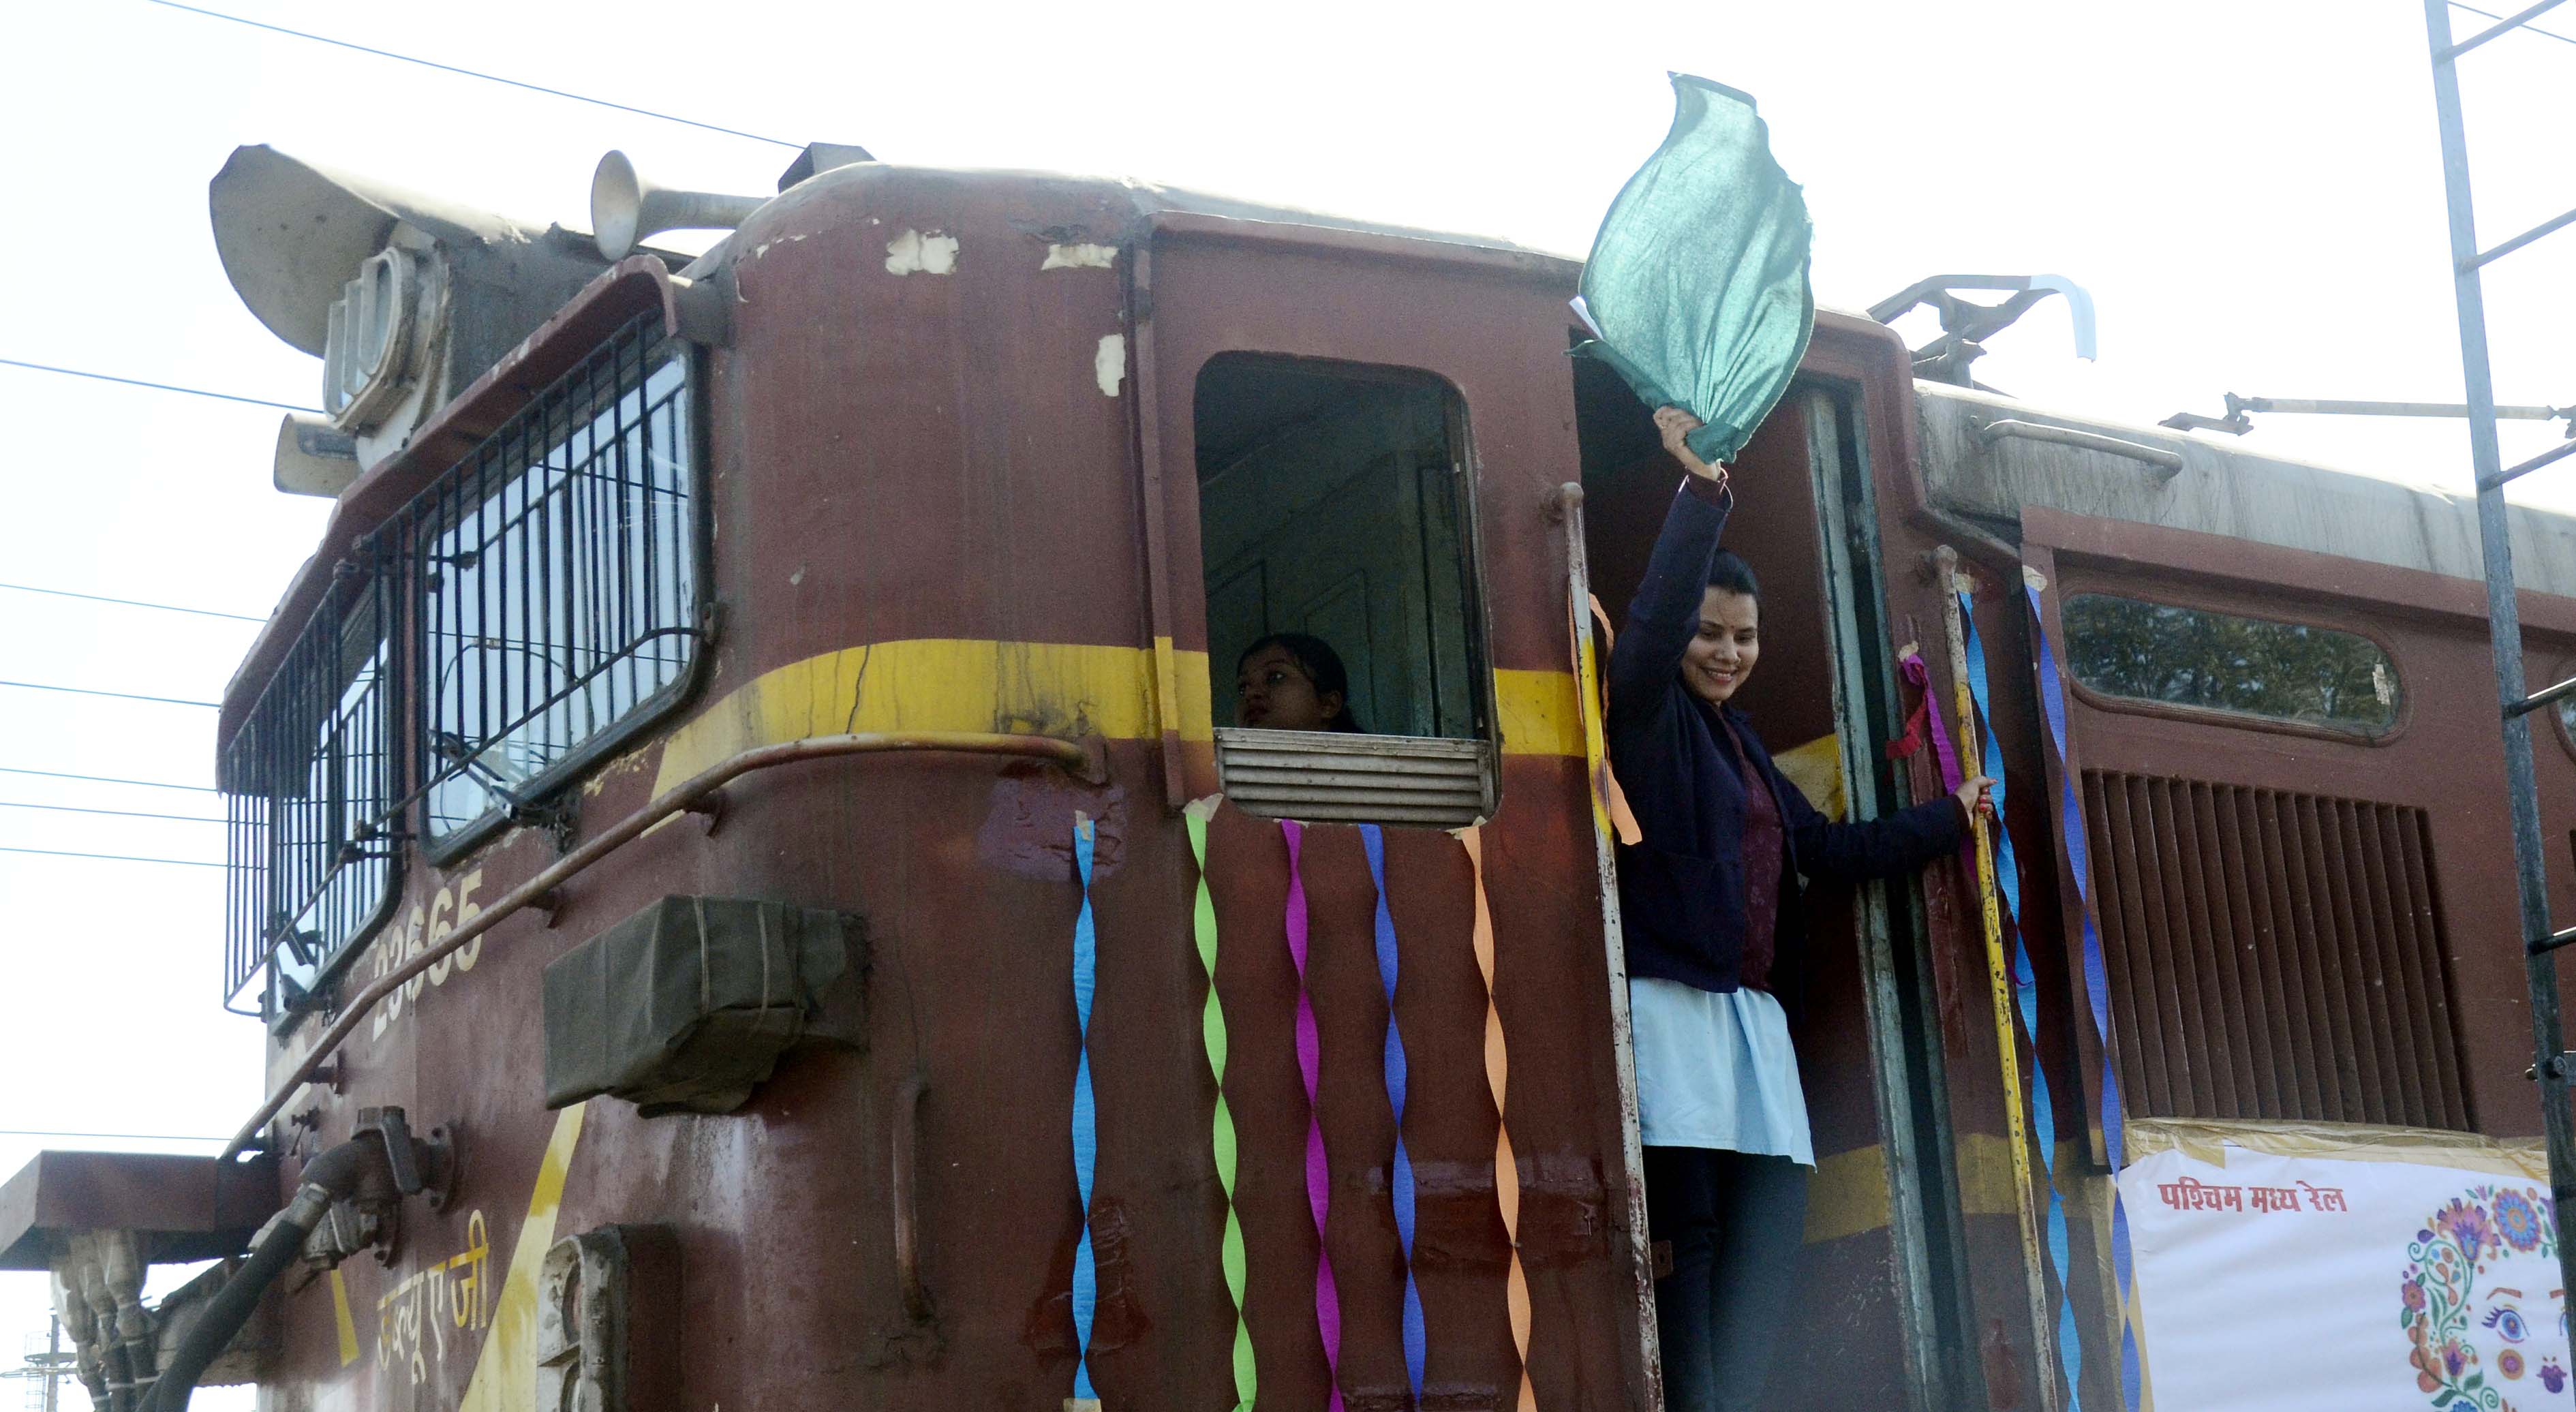 Women loco pilot operated special Pink freight train at Habibganj